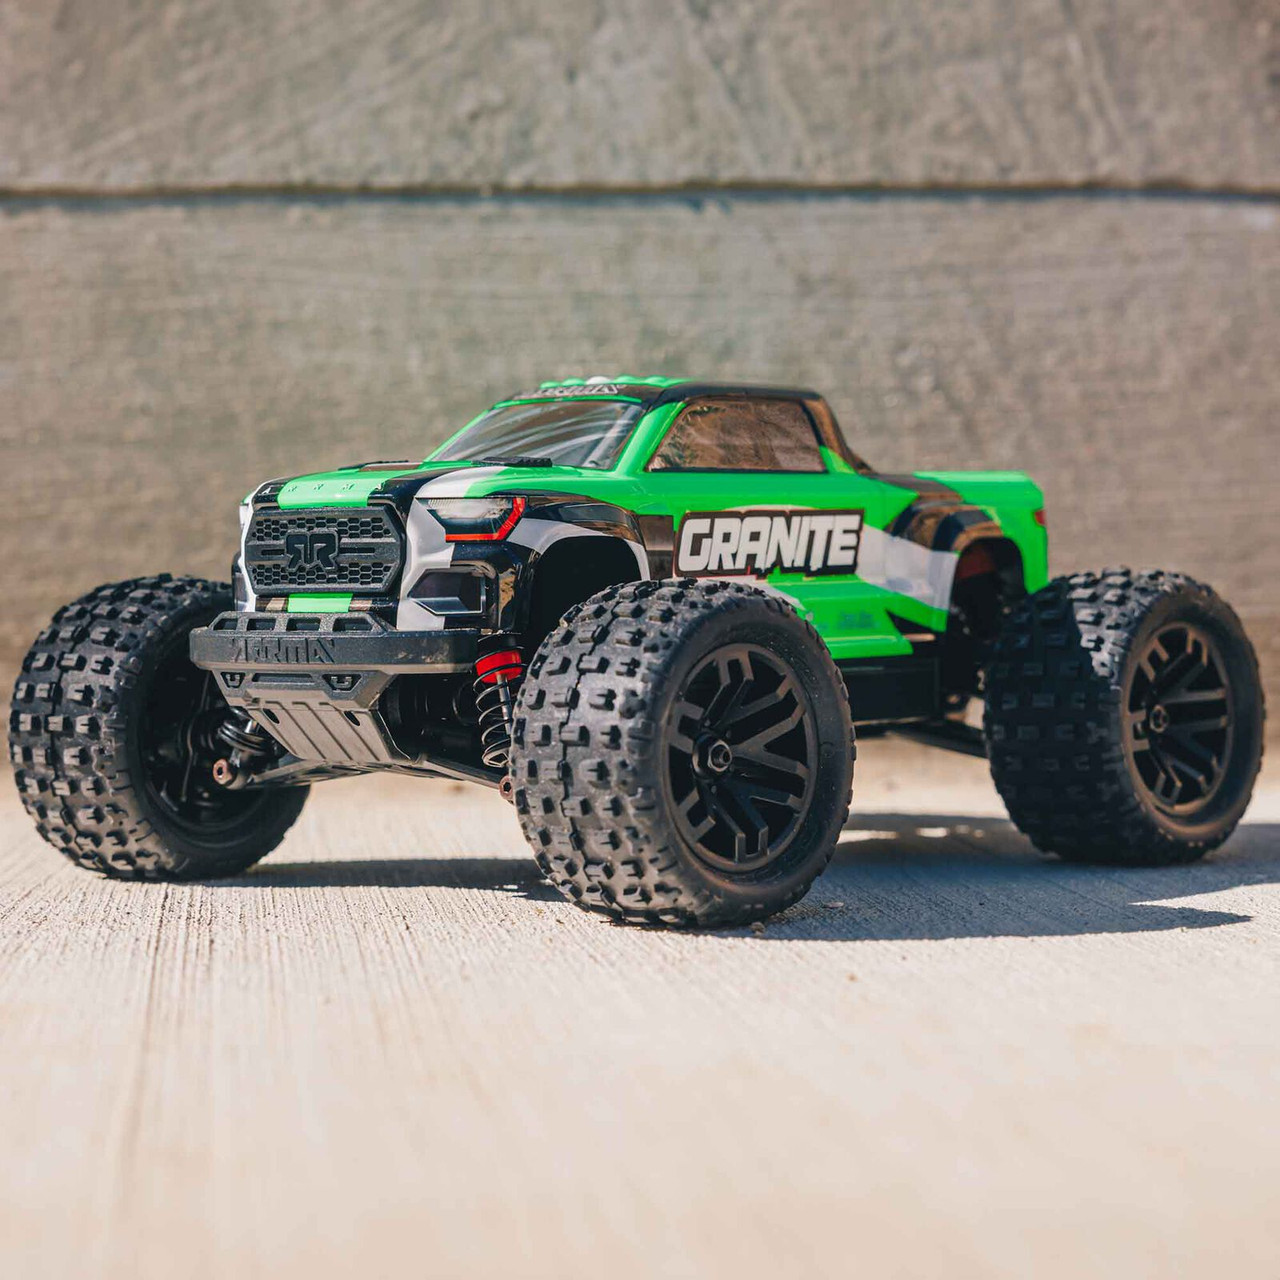 Arrma 1/18 GRANITE GROM MEGA 380 Brushed 4X4 Monster Truck RTR with Battery  & Charger, Green - Small Addictions RC